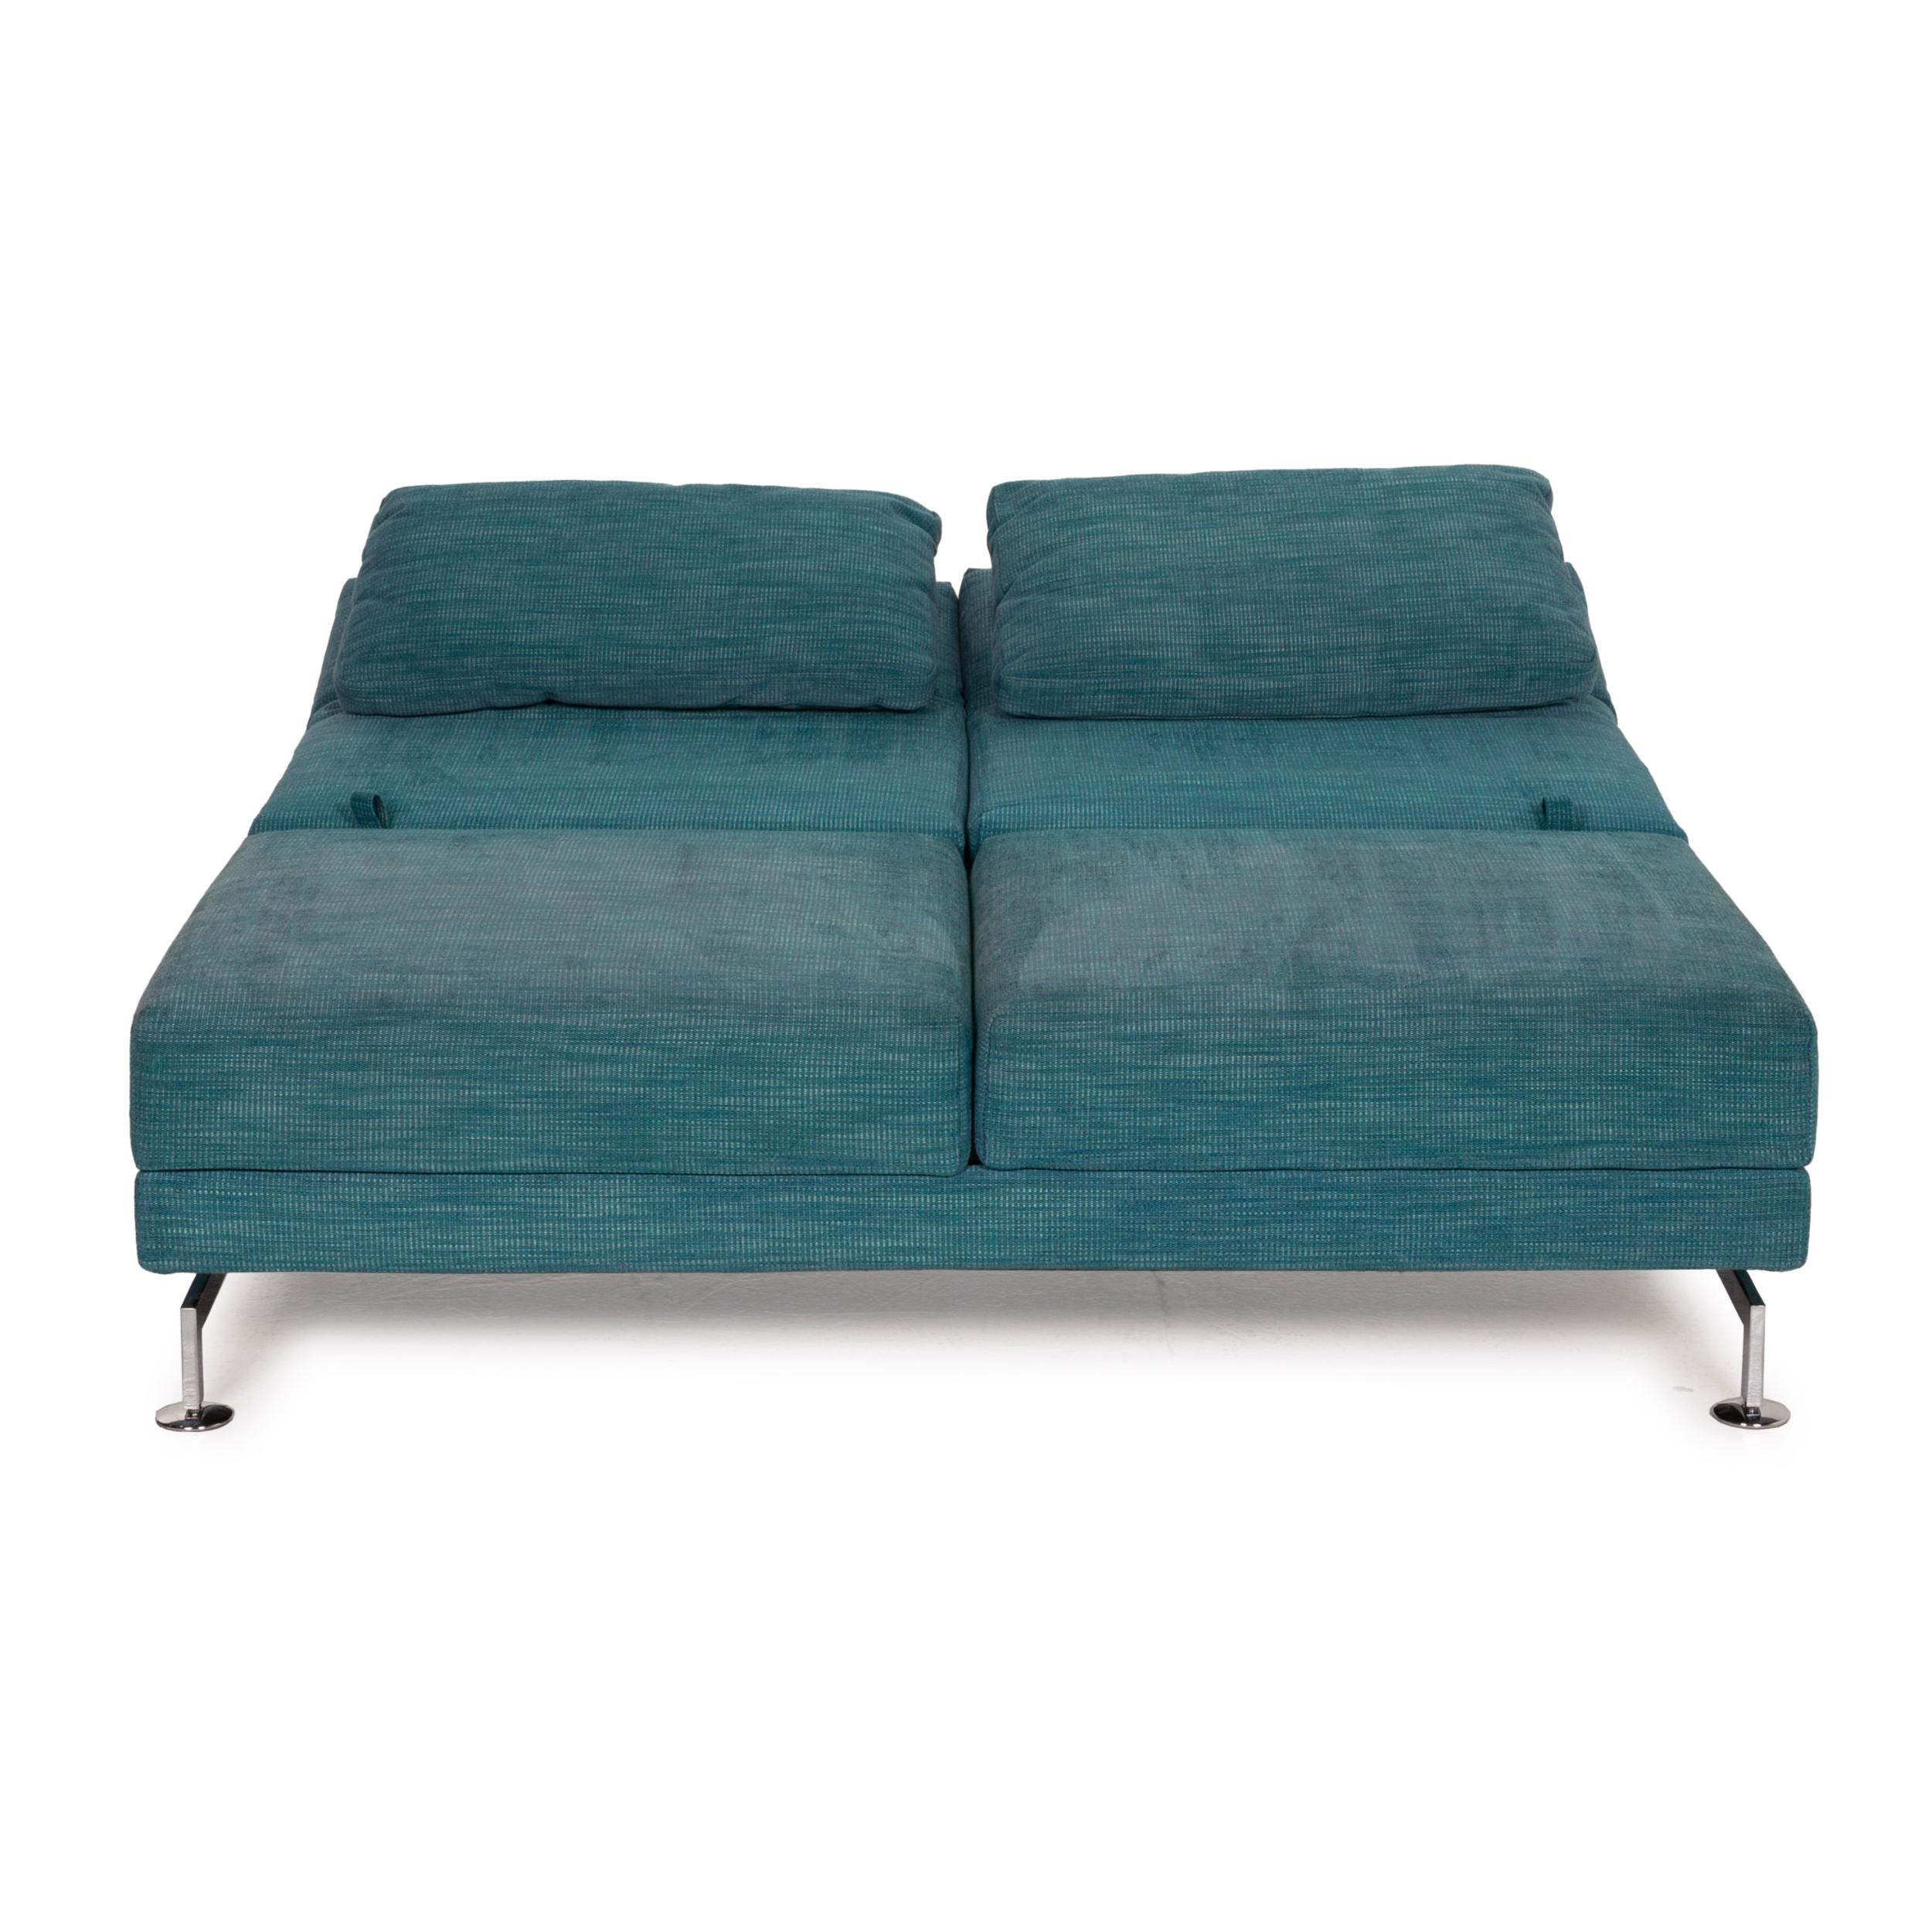 Modern Brühl & Sippold Moule Fabric Sofa Blue Two-Seater Reclining Function Turquoise For Sale